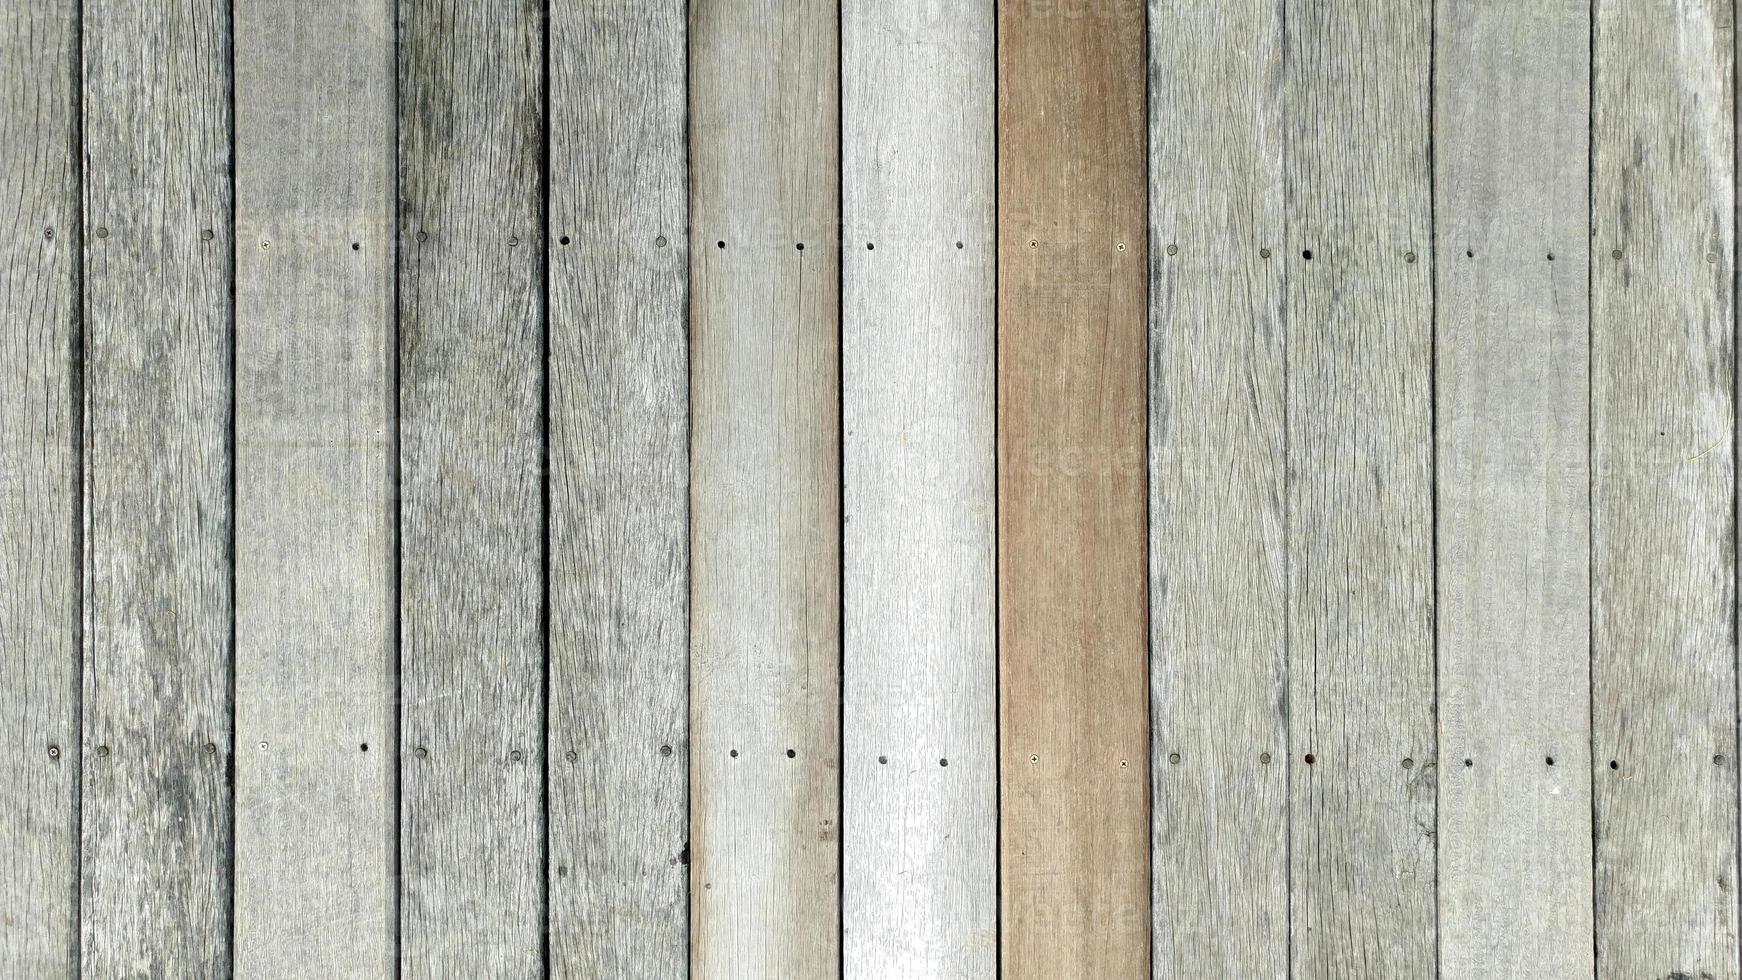 The Old wooden lath pattern texture background. photo